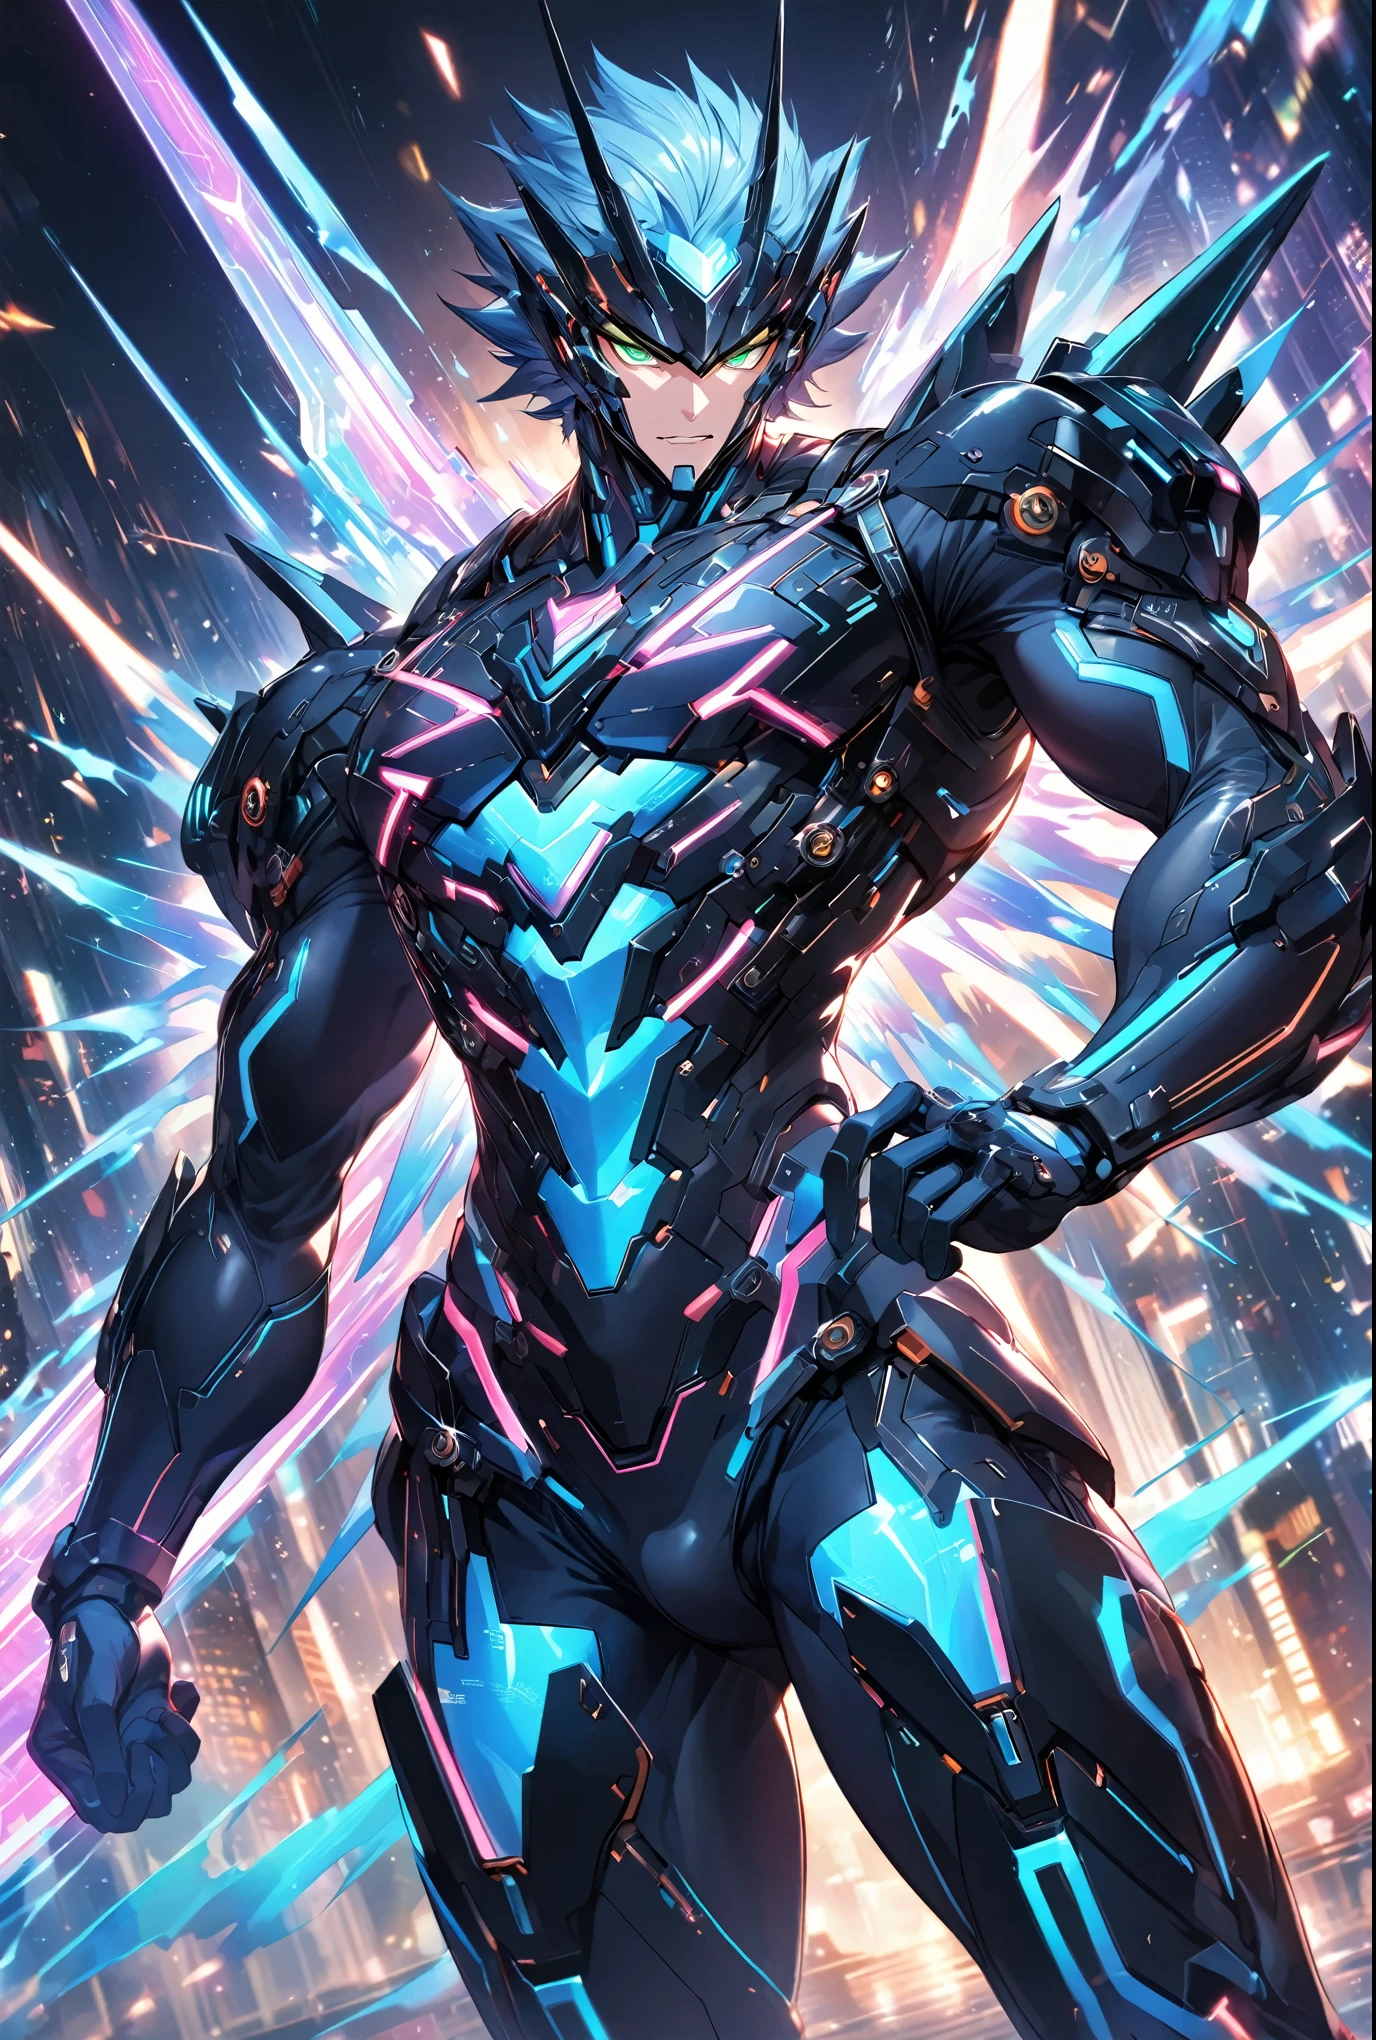 A dynamic male character in a futuristic black and blue cyber suit with glowing LED lines, short spiky blue hair, and sharp green eyes. He is tall, muscular, and has an energy backpack on his back. The character is in a combat pose, wielding energy blades, with a serious and focused expression. The background is a digital cityscape with floating holographic elements and light effects, representing a cybernetic world.,Battle Style,Dynamic Pose,cool,The best composition,Intricate details,Very detailed,Disorganized,Anatomically correct